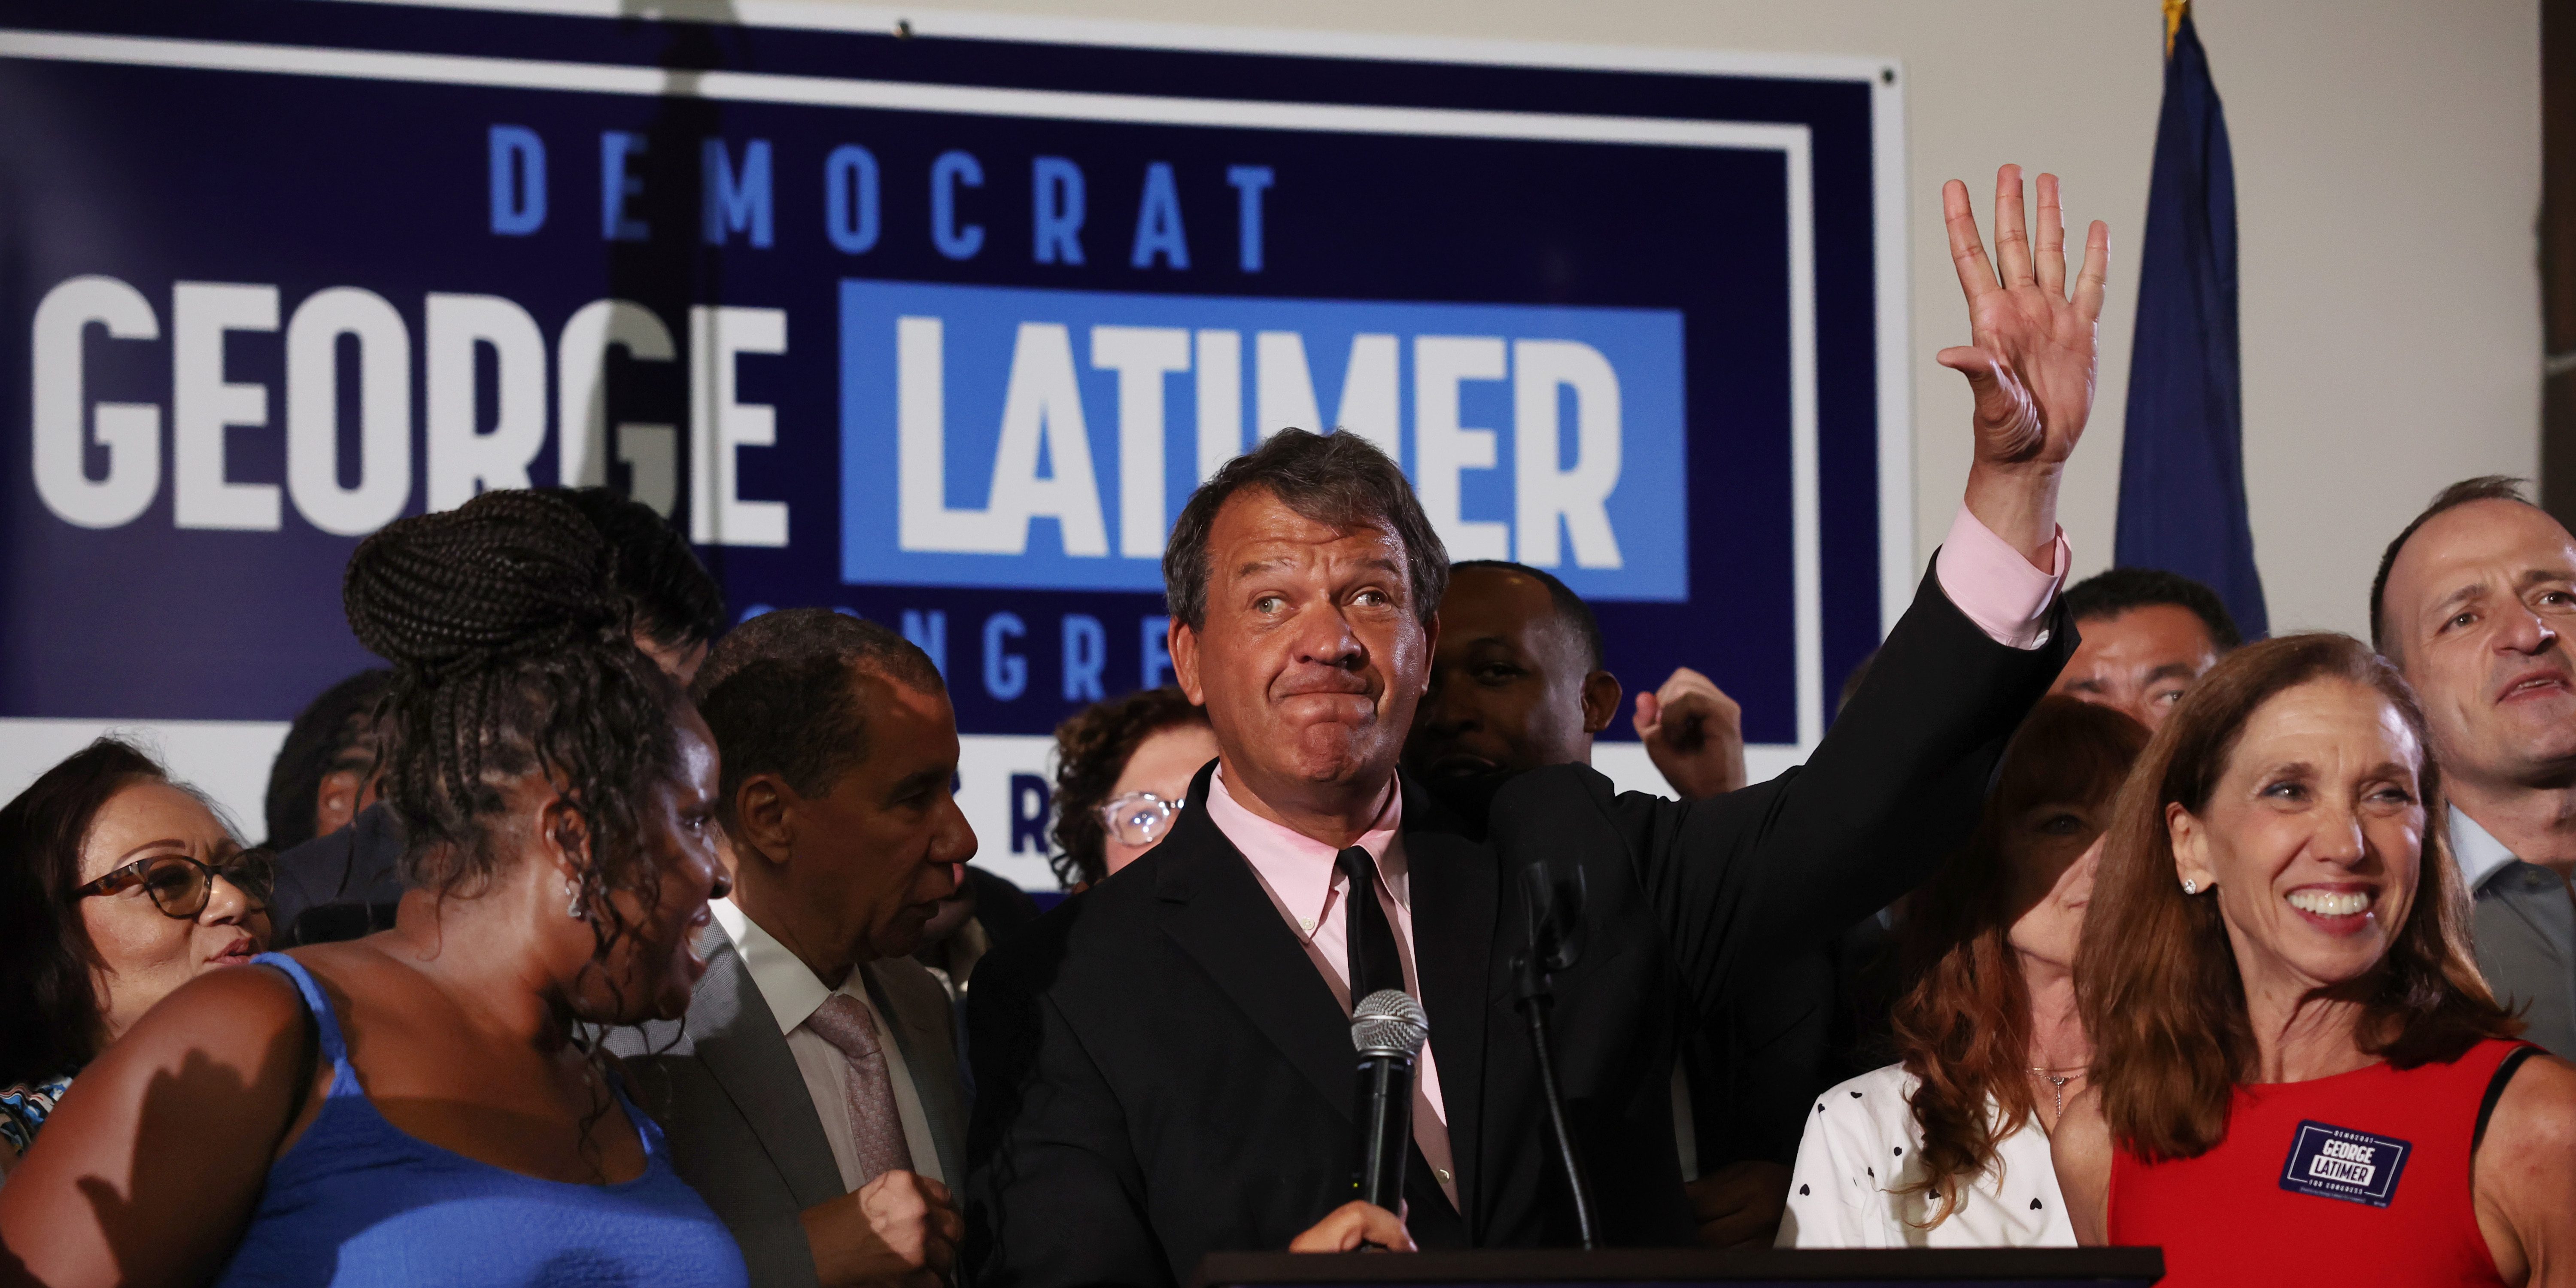 WHITE PLAINS, NEW YORK - JUNE 25: Westchester County Executive George Latimer speaks to supporters after winning his race against Democratic incumbent Representative Jamaal Bowman in the 16th Congressional District of New York's Democratic primary. Latimer beat Bowman, one of the most liberal members of Congress, after the congressman made a series of statements critical of Israel and supportive of Palestinians in a district with a large population supportive of Israel.  (Photo by Spencer Platt/Getty Images)